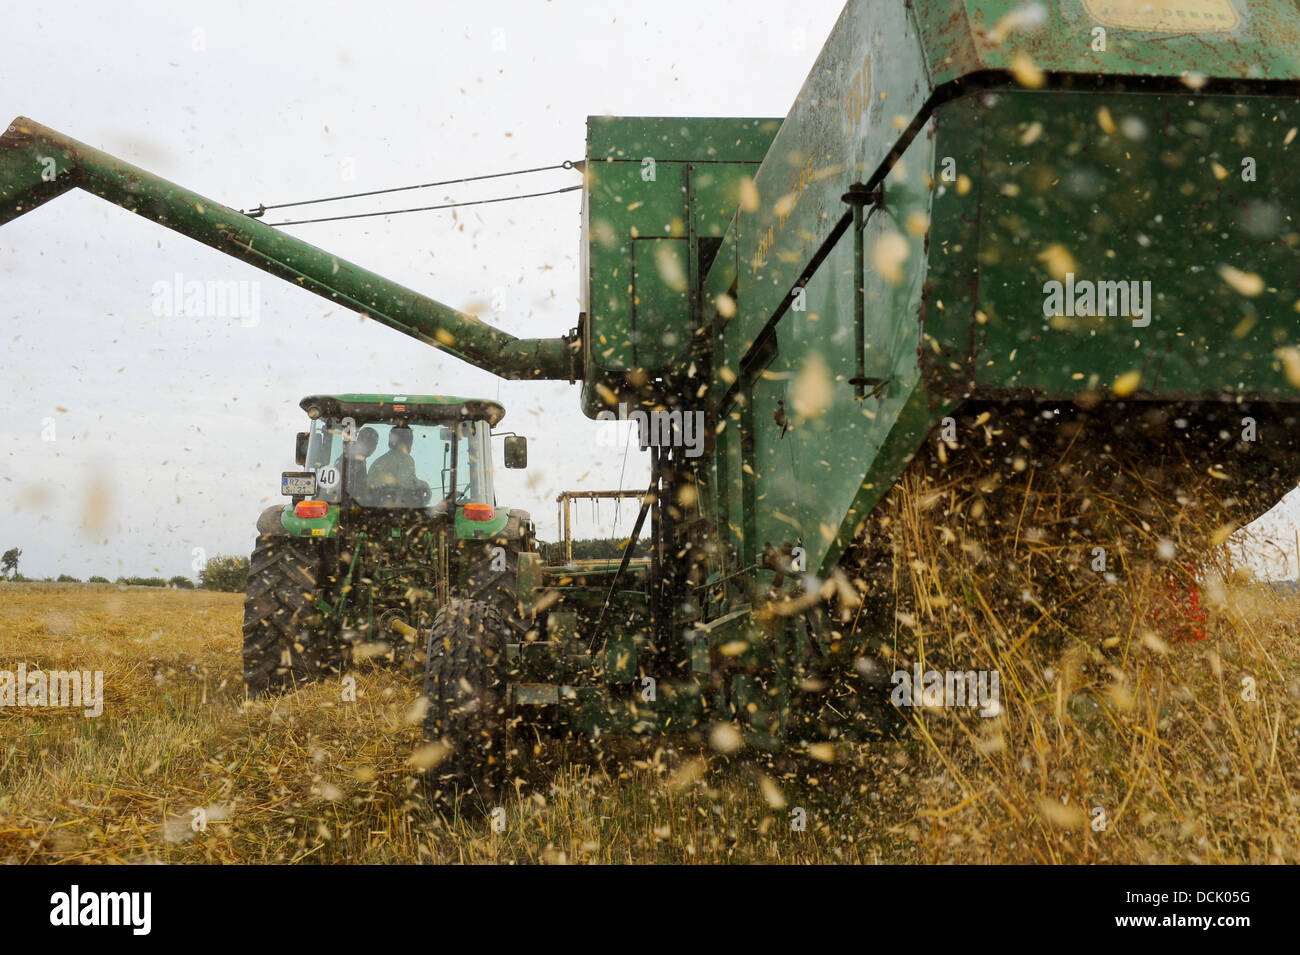 GERMANY old John Deere combine harvester 360 from 1968 pulled by tractor harvesting oats at organic farm Stock Photo